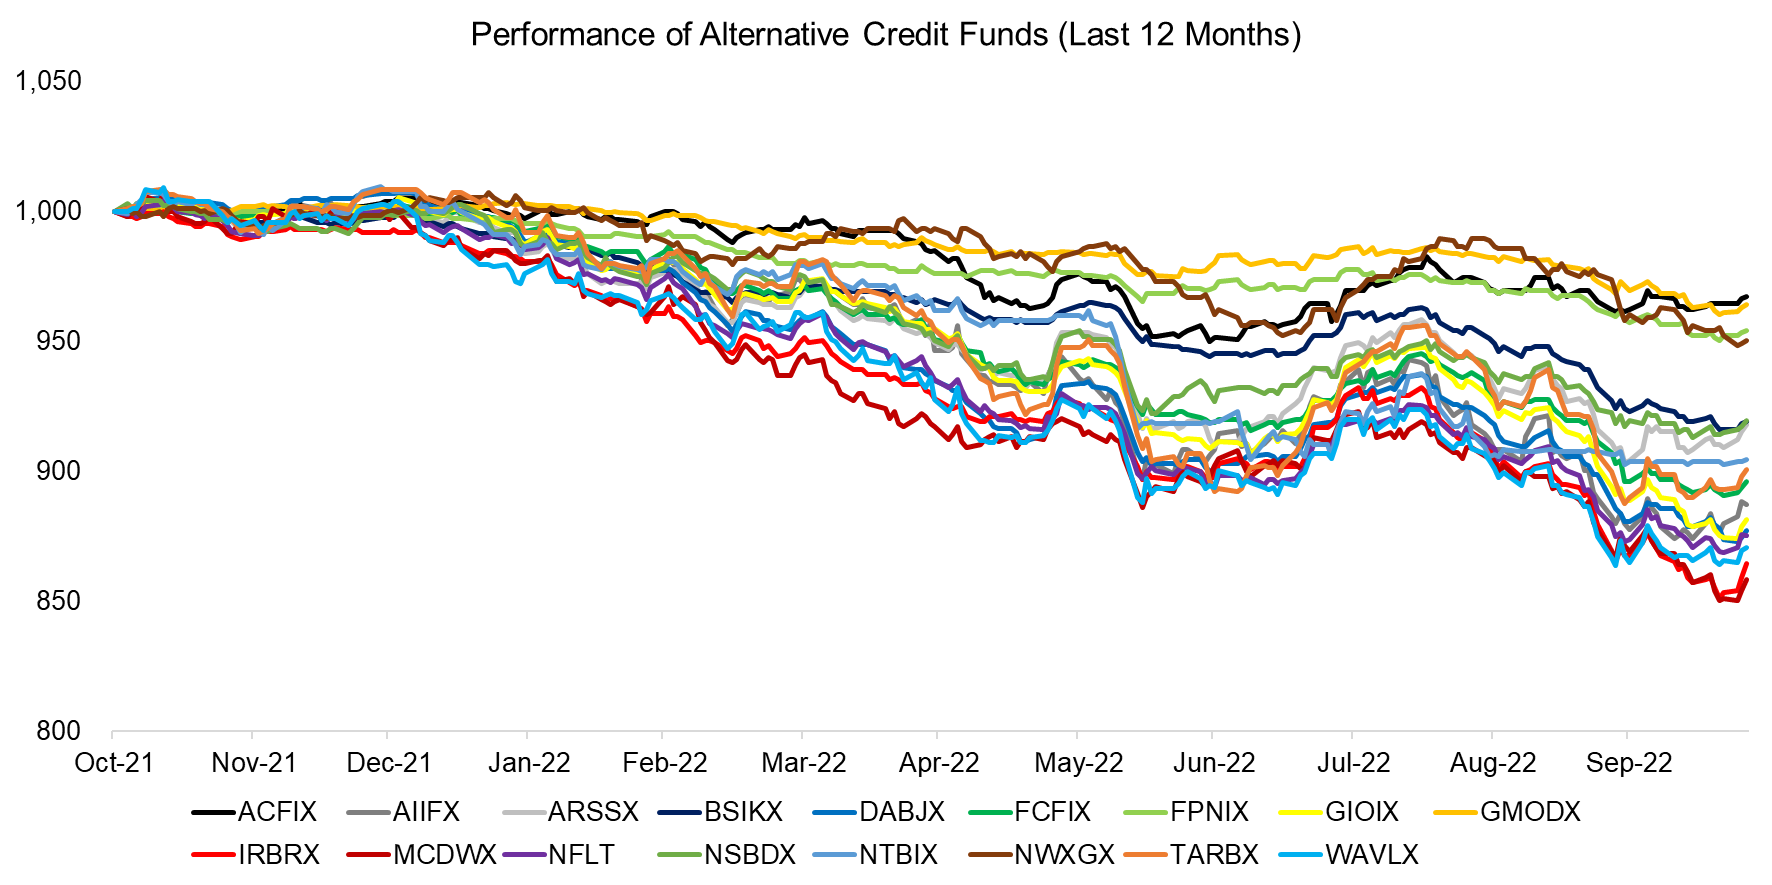 Performance of Alternative Credit Funds (Last 12 Months)